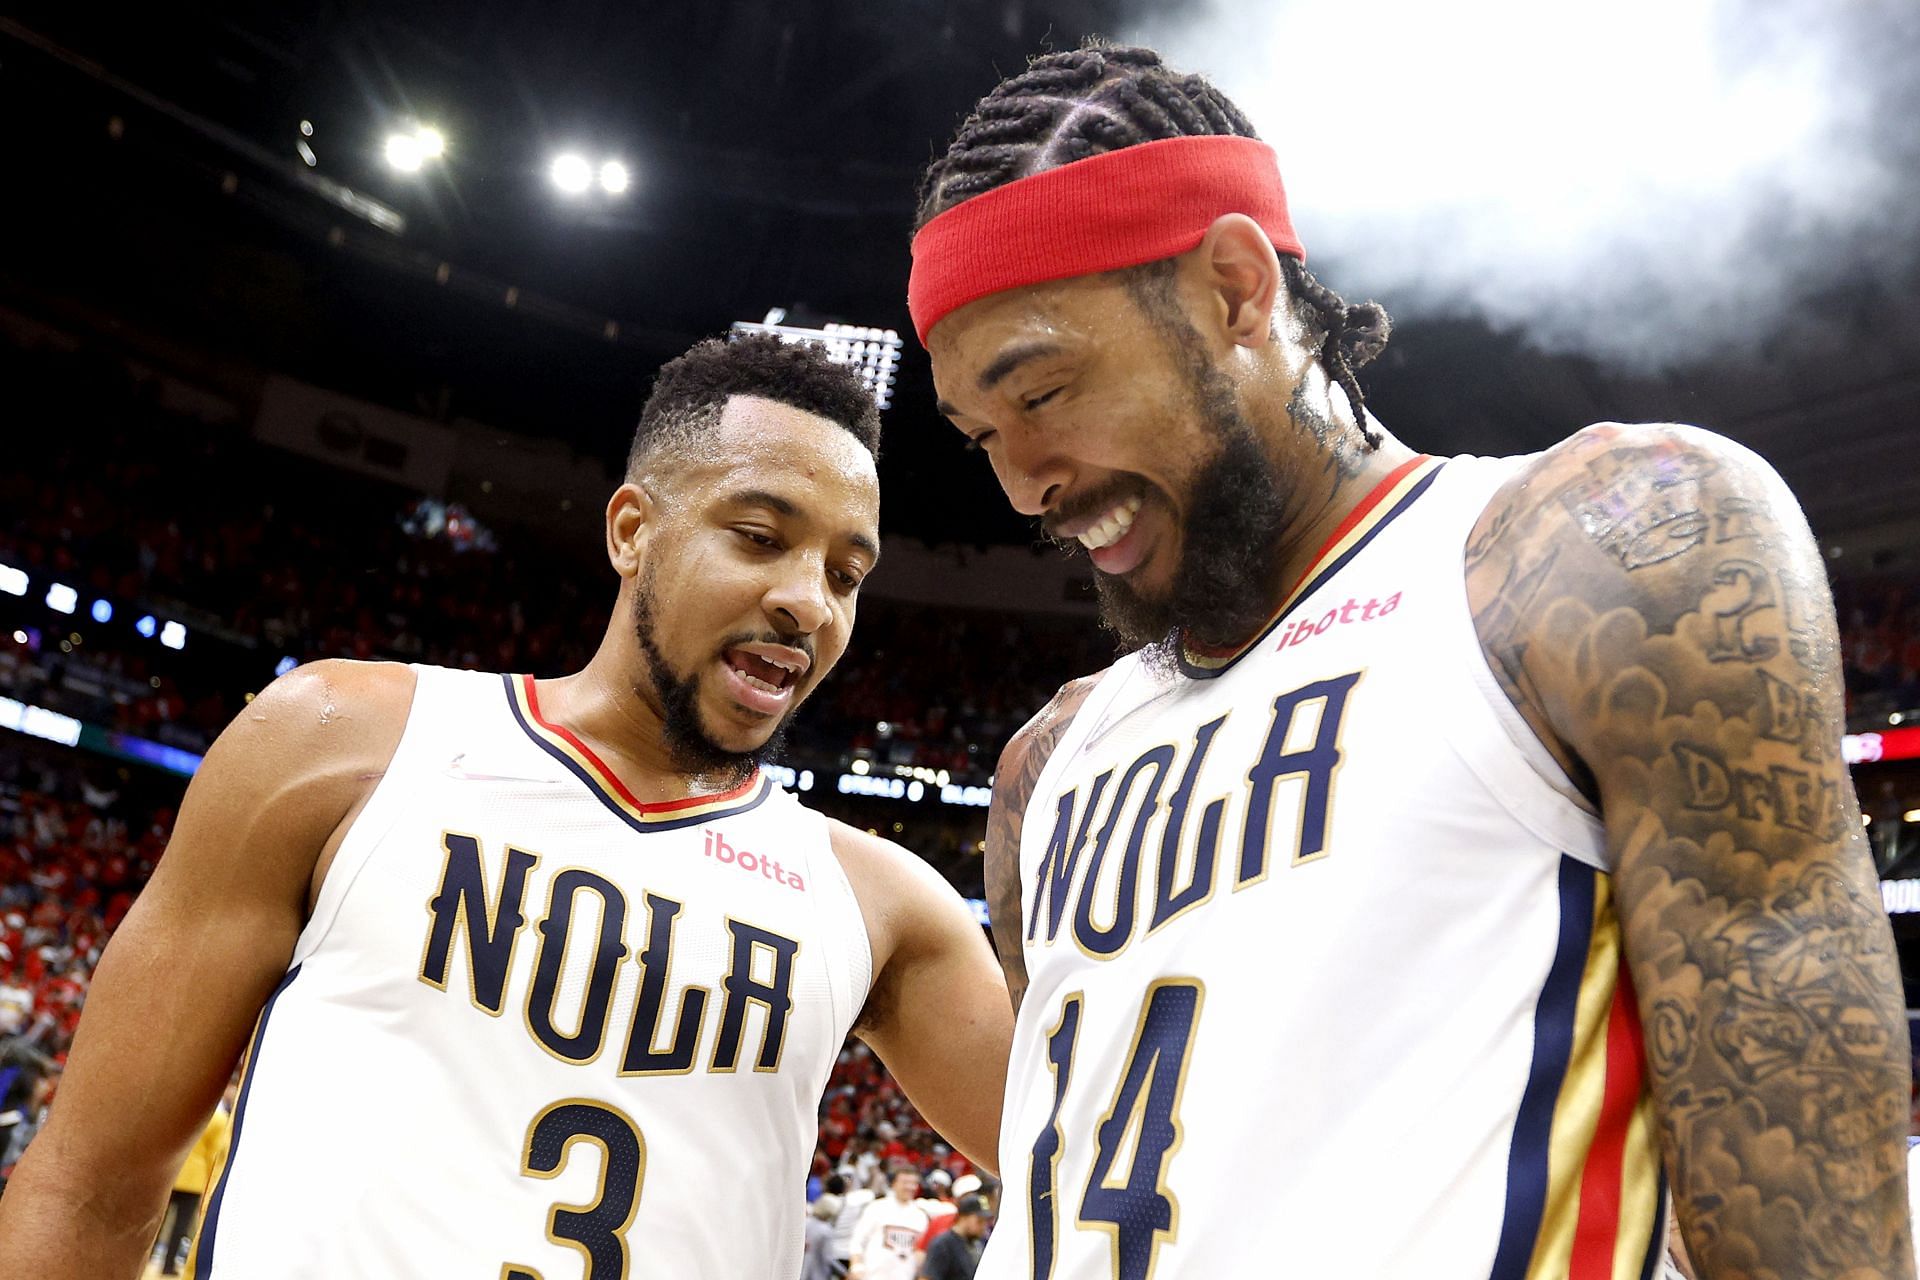 Without Zion Williamson, Brandon Ingram and CJ McCollum carried the New Orleans Pelicans to improbable heights this season.